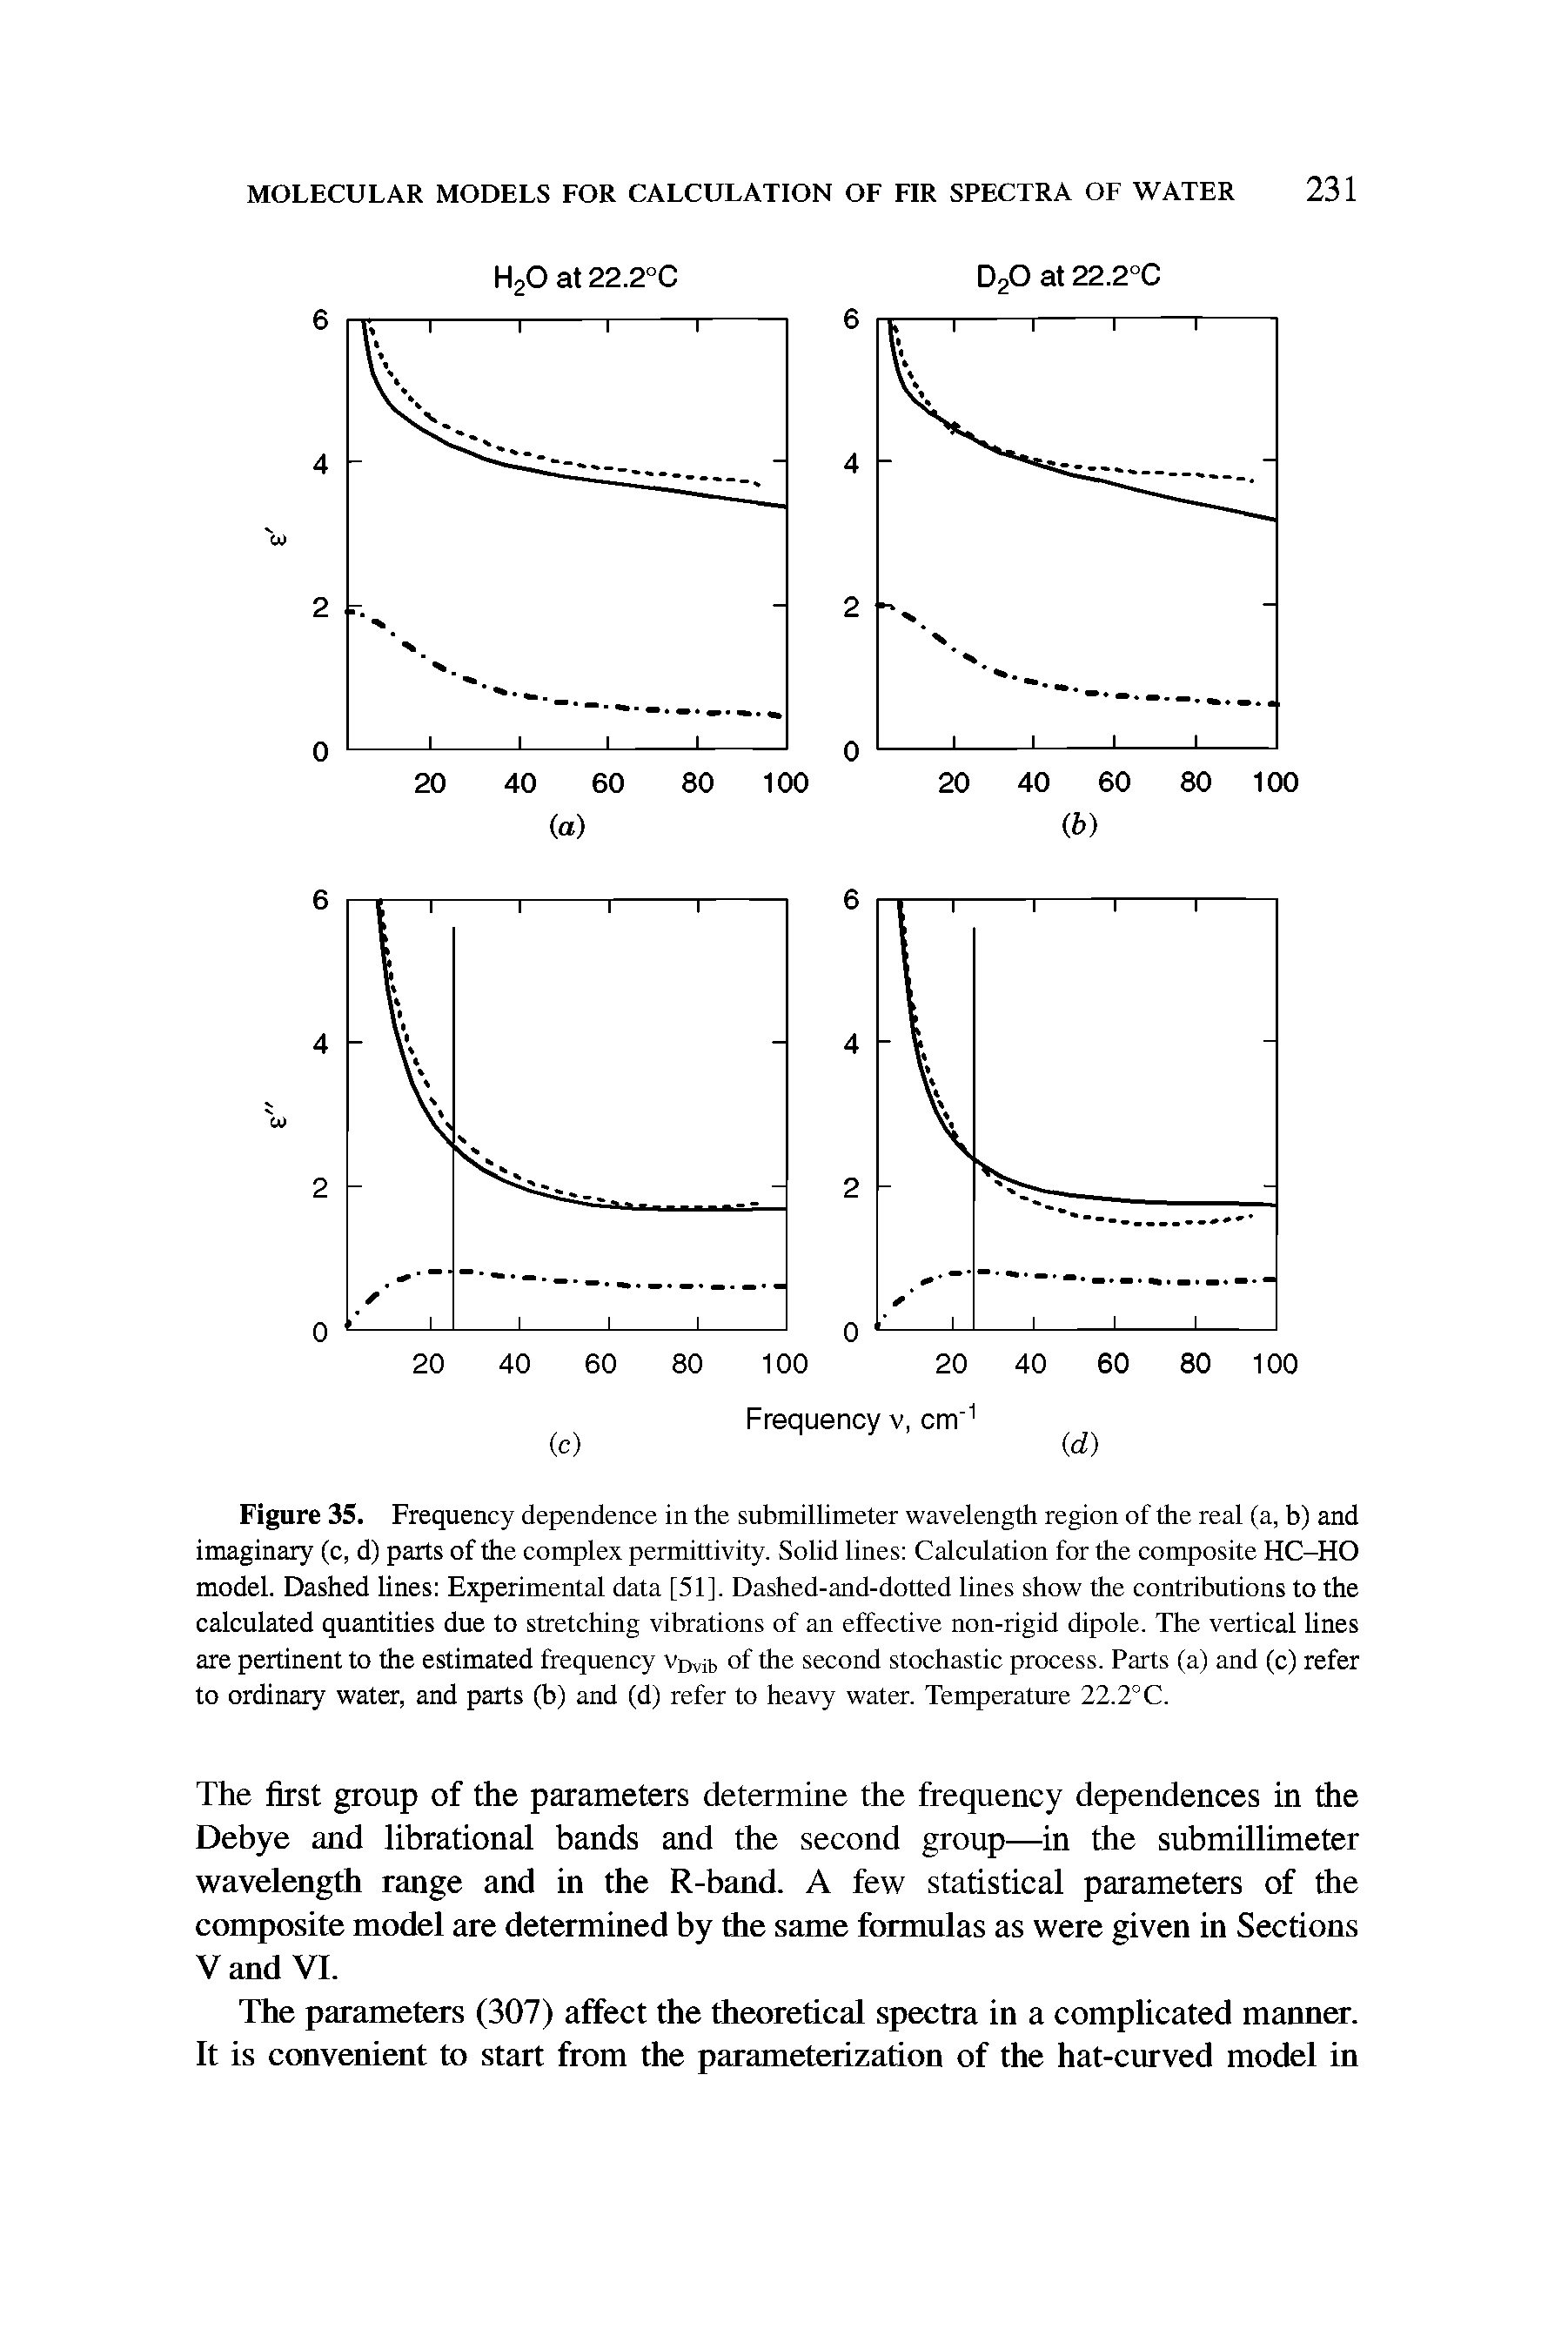 Figure 35. Frequency dependence in the submillimeter wavelength region of the real (a, b) and imaginary (c, d) parts of the complex permittivity. Solid lines Calculation for the composite HC-HO model. Dashed lines Experimental data [51]. Dashed-and-dotted lines show the contributions to the calculated quantities due to stretching vibrations of an effective non-rigid dipole. The vertical lines are pertinent to the estimated frequency v b of the second stochastic process. Parts (a) and (c) refer to ordinary water, and parts (b) and (d) refer to heavy water. Temperature 22.2°C.